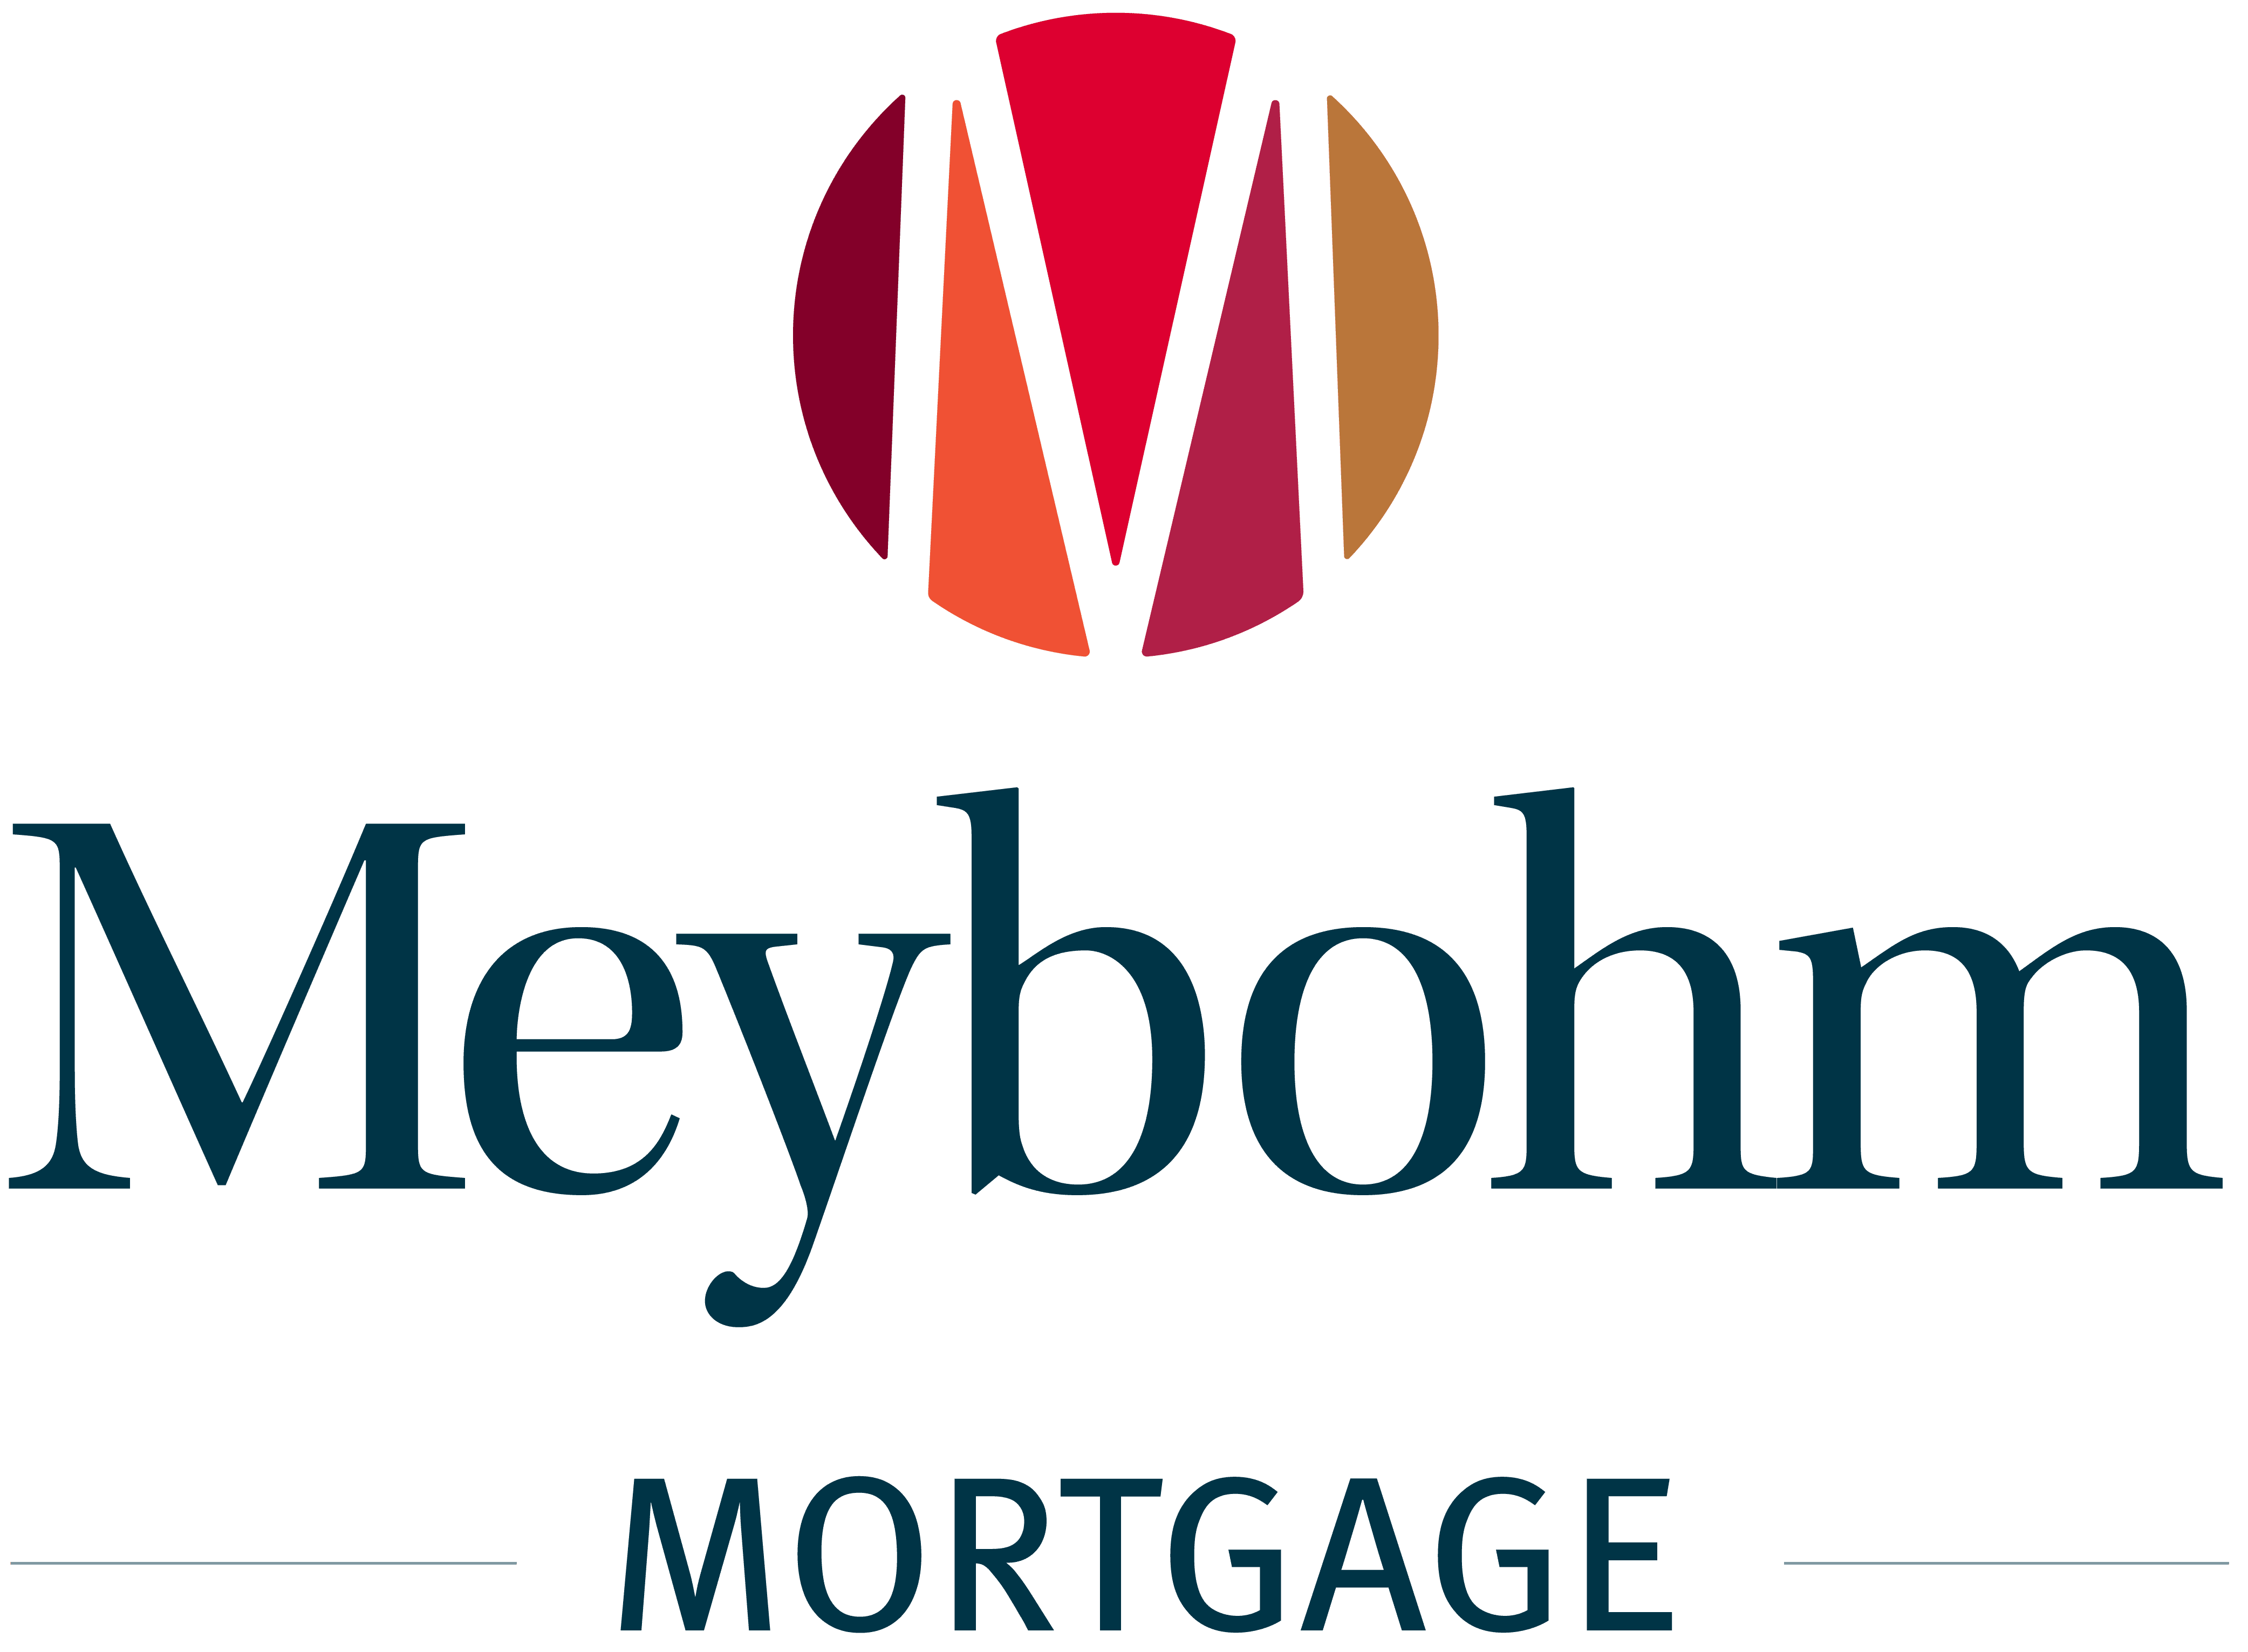 Meybohm Real Estate announces new mortgage company